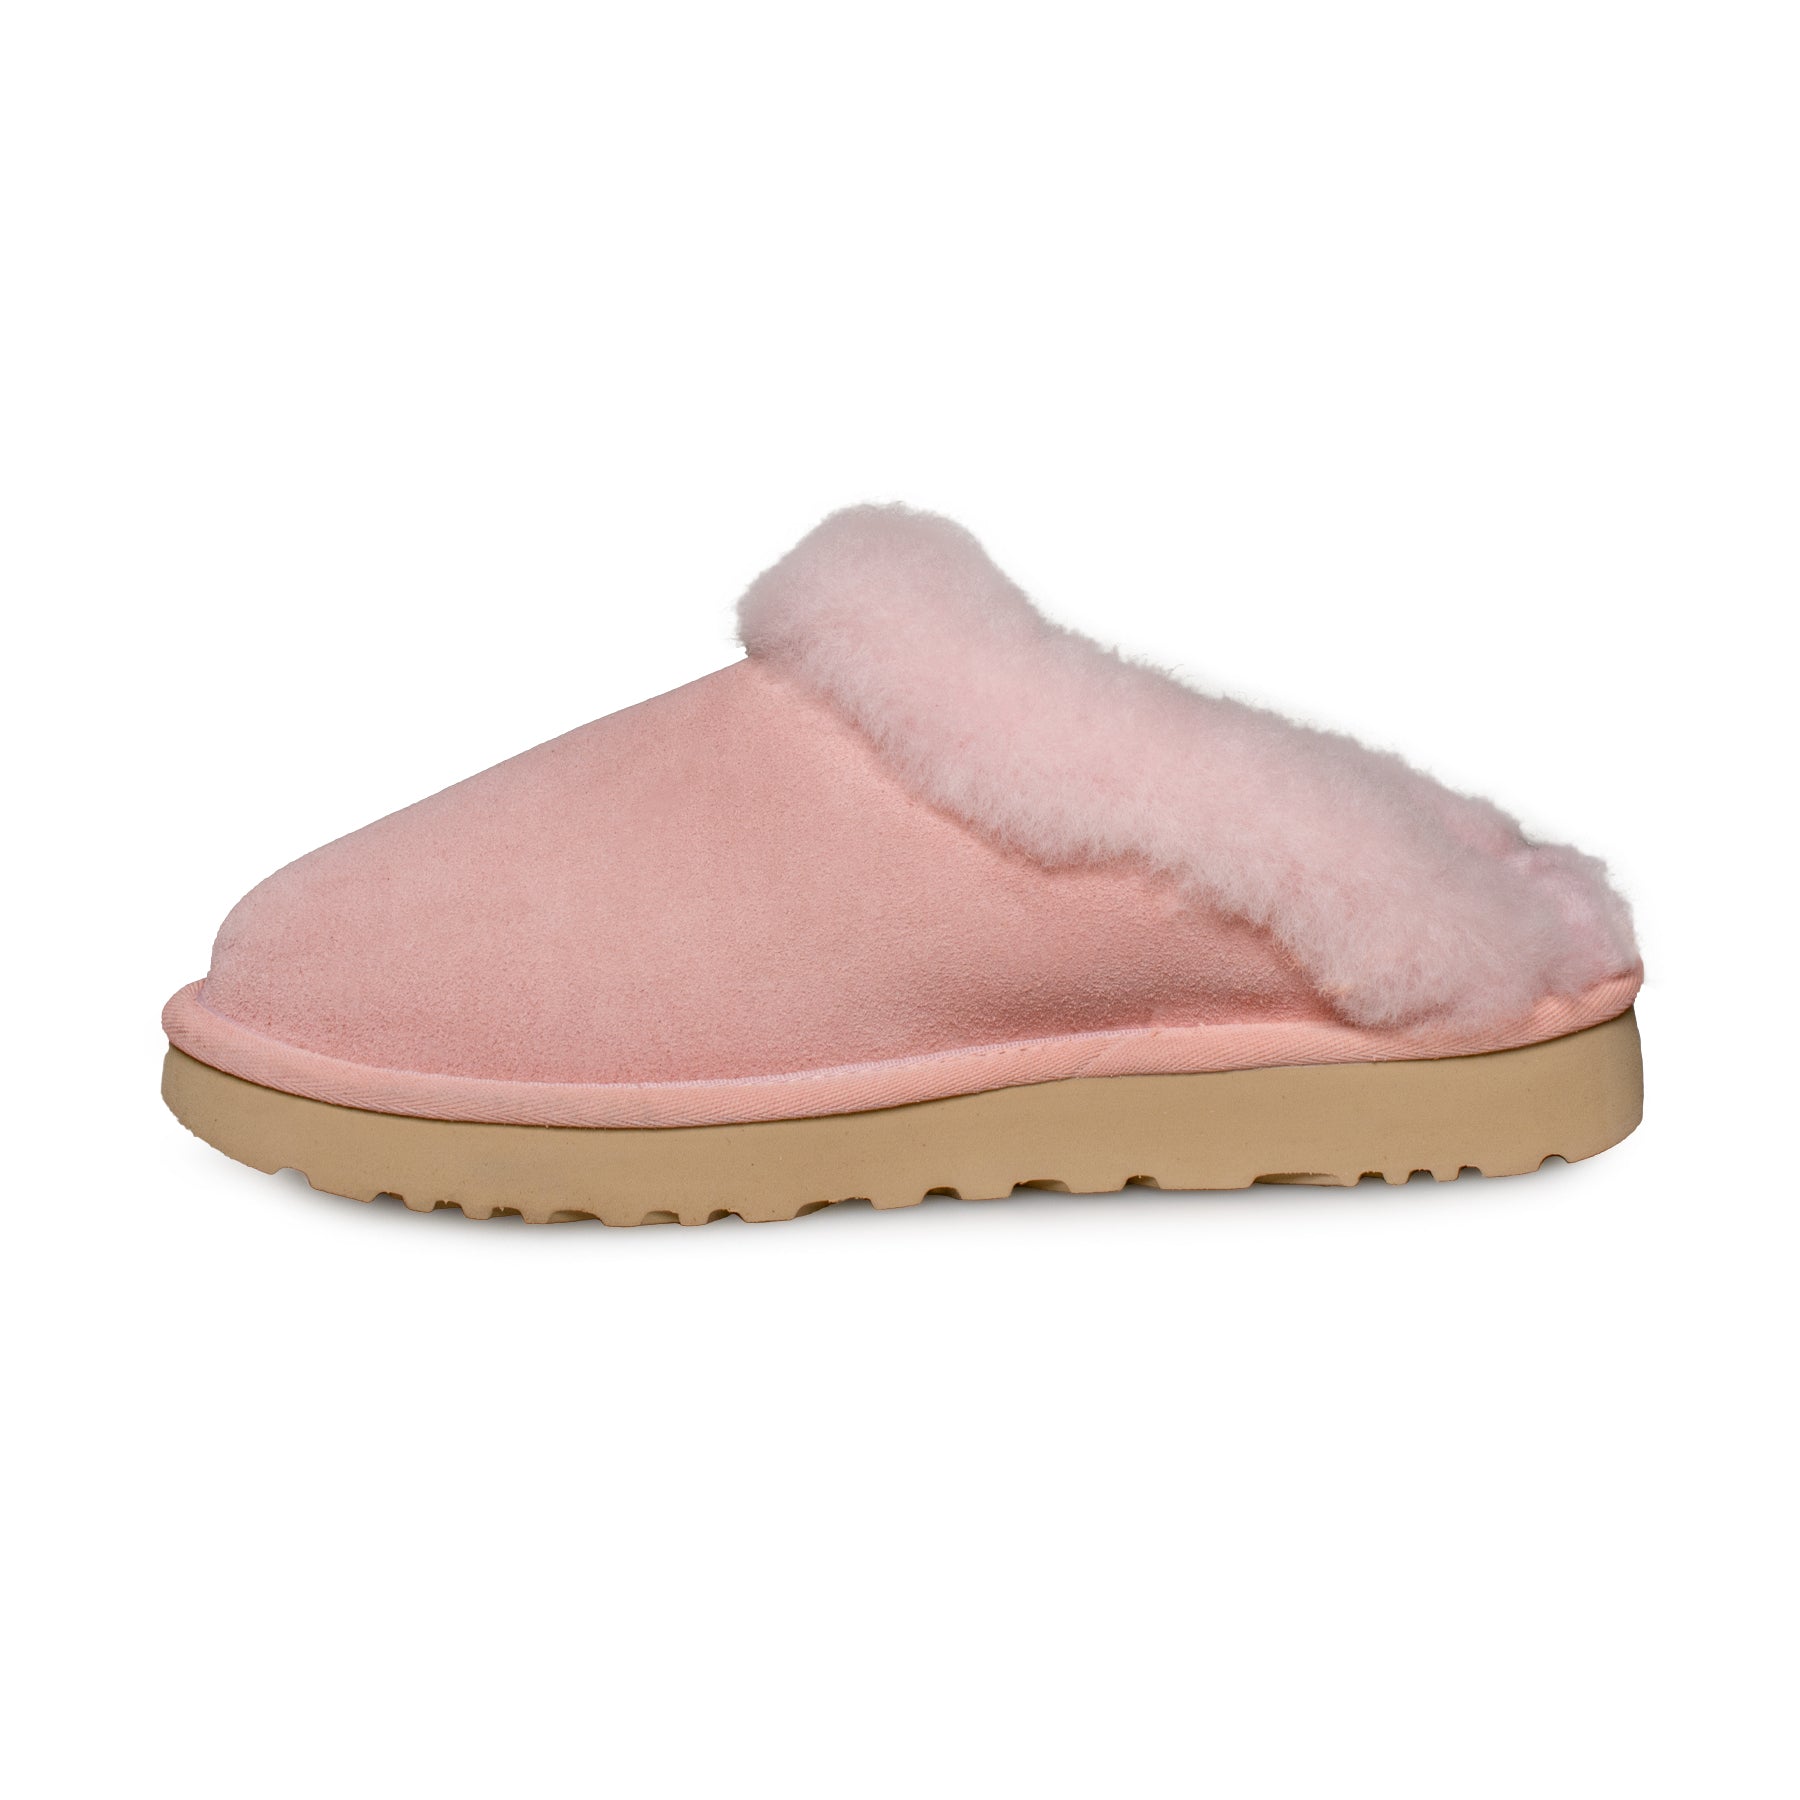 UGG Cluggette Pink Cloud Slippers - Women's – MyCozyBoots